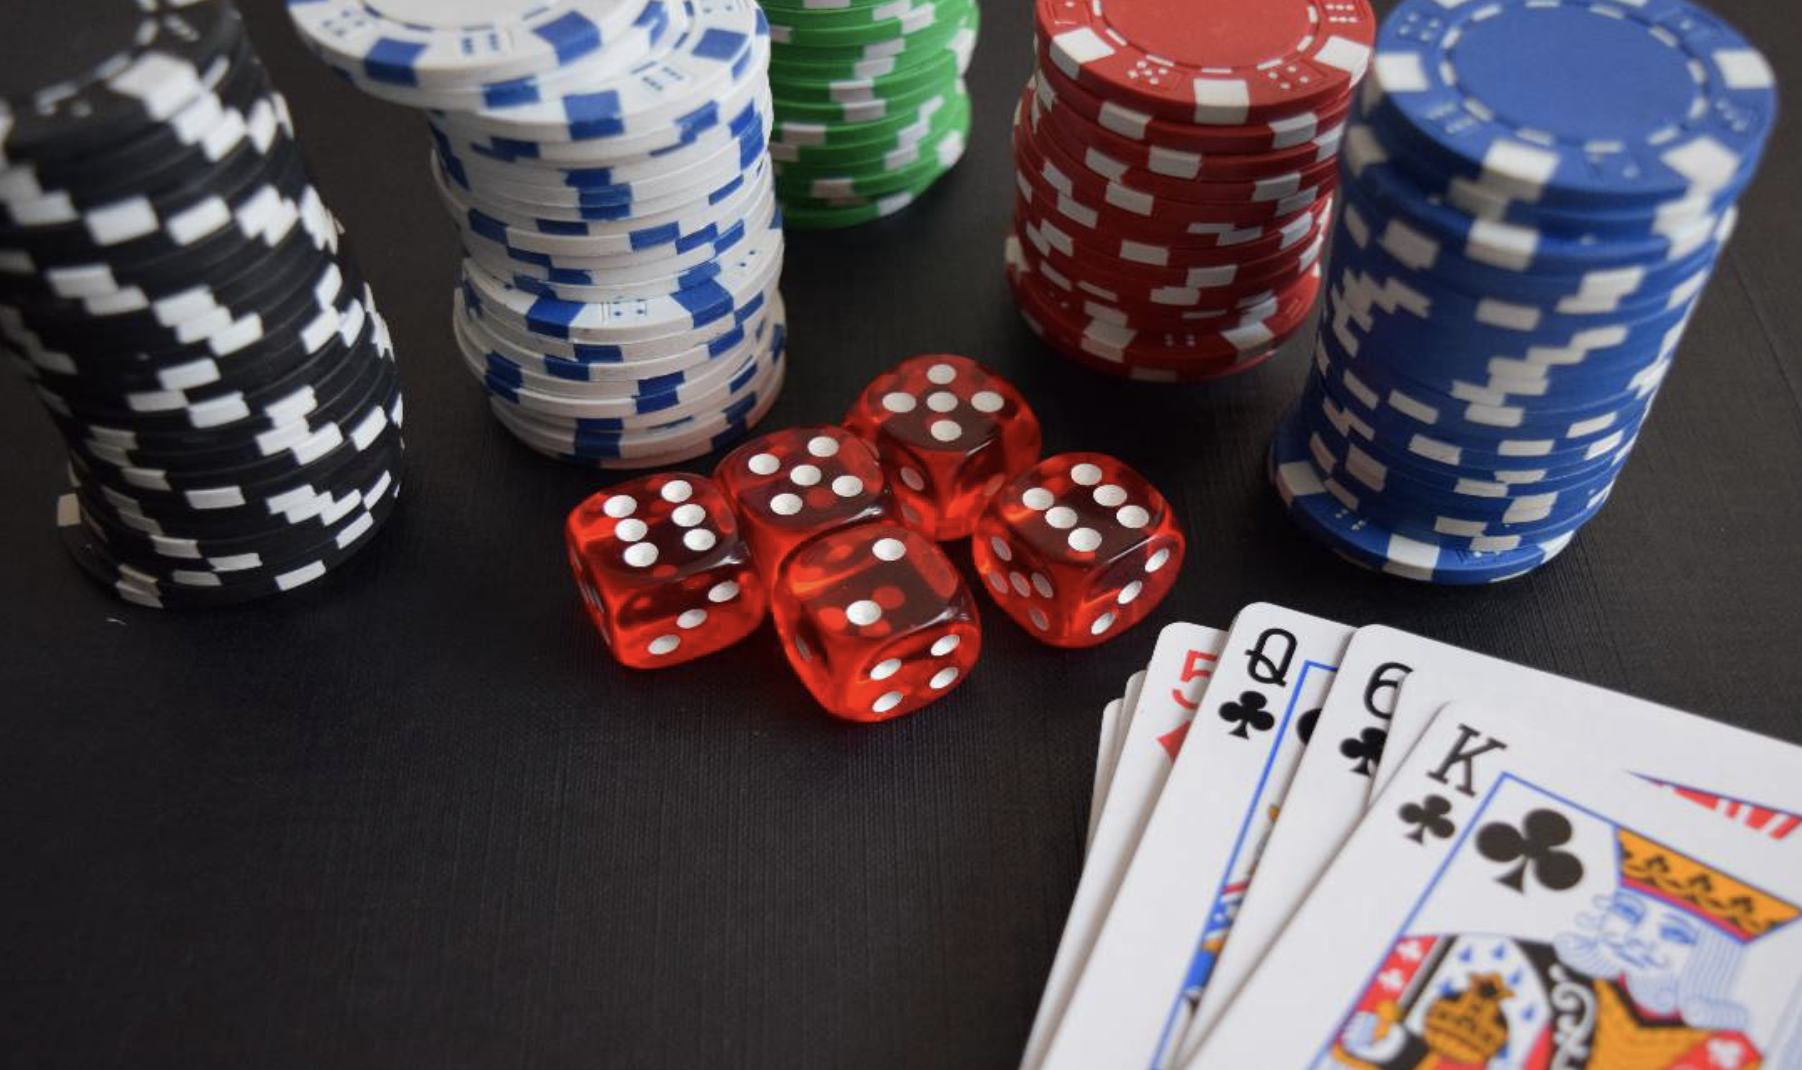 Top 8 Things To Look For In An Online Casino